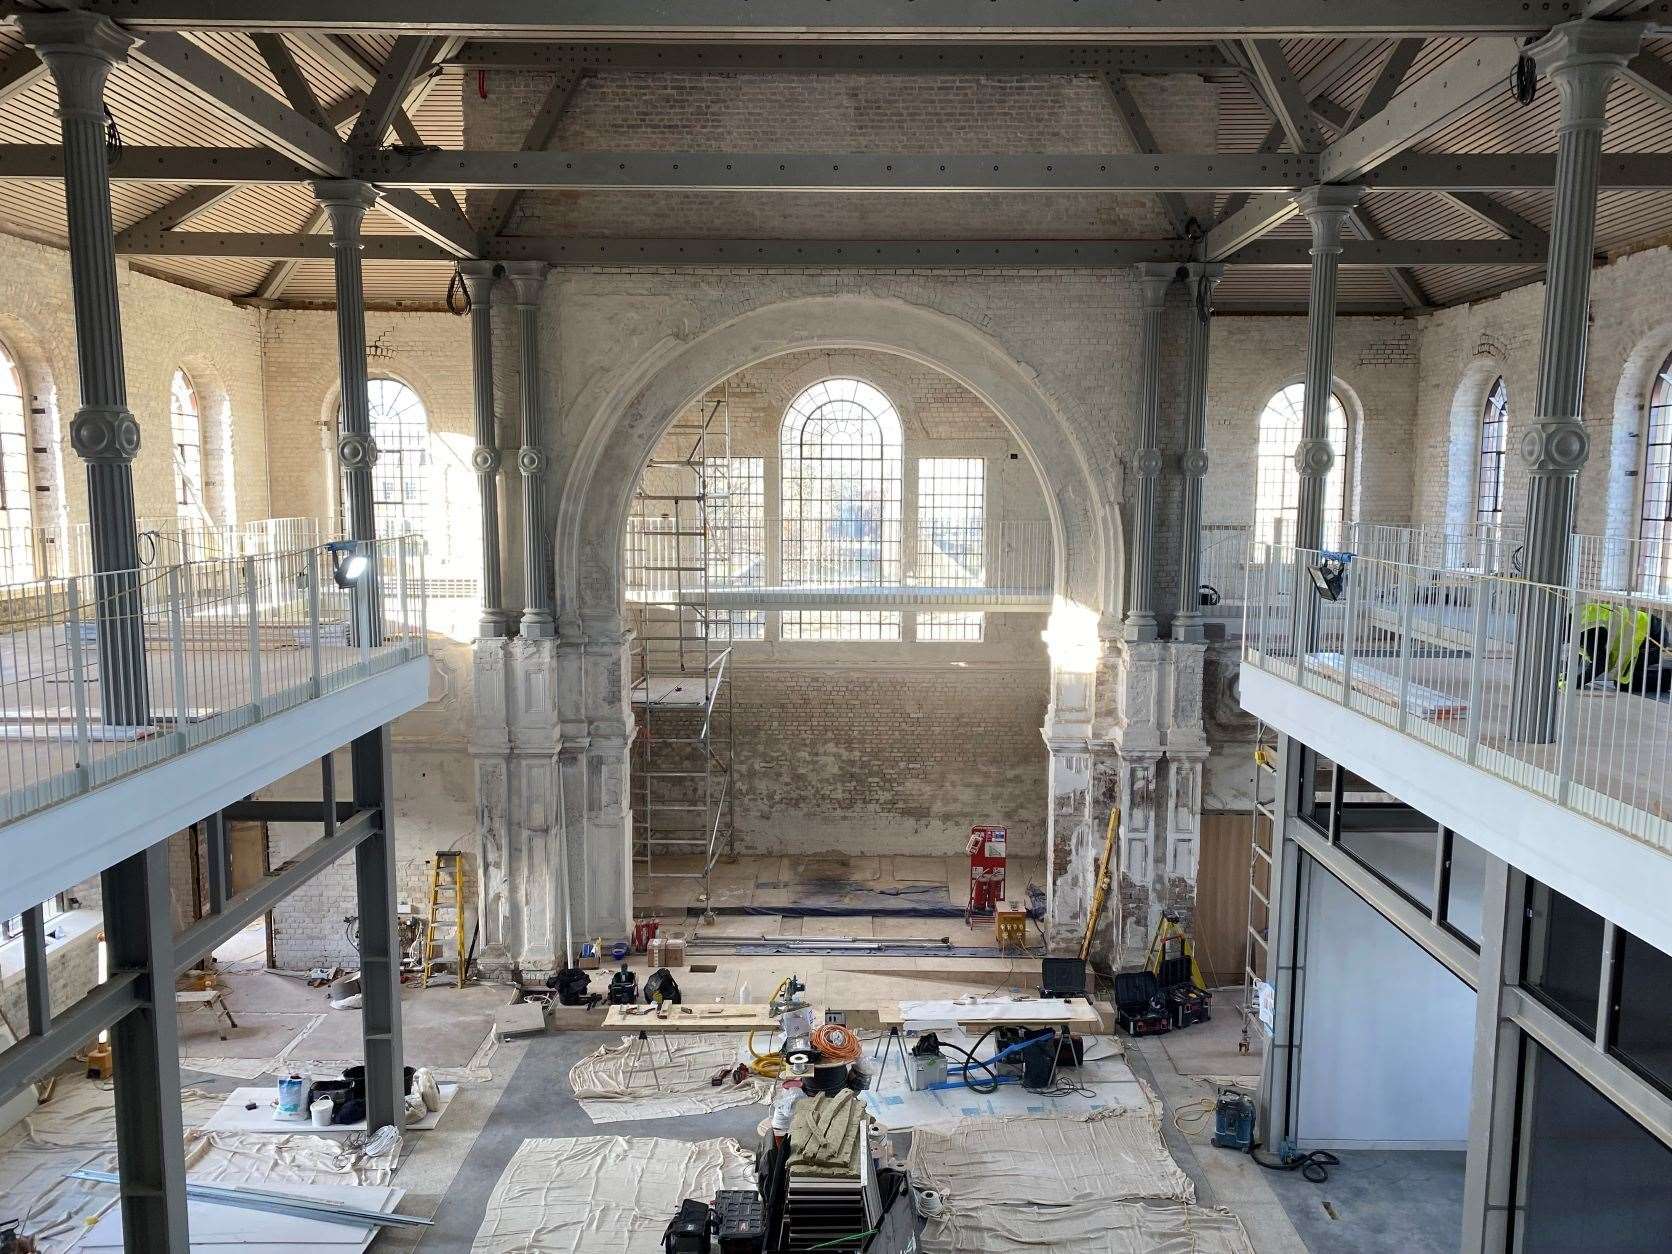 What the inside of the Grade II listed building looks like now